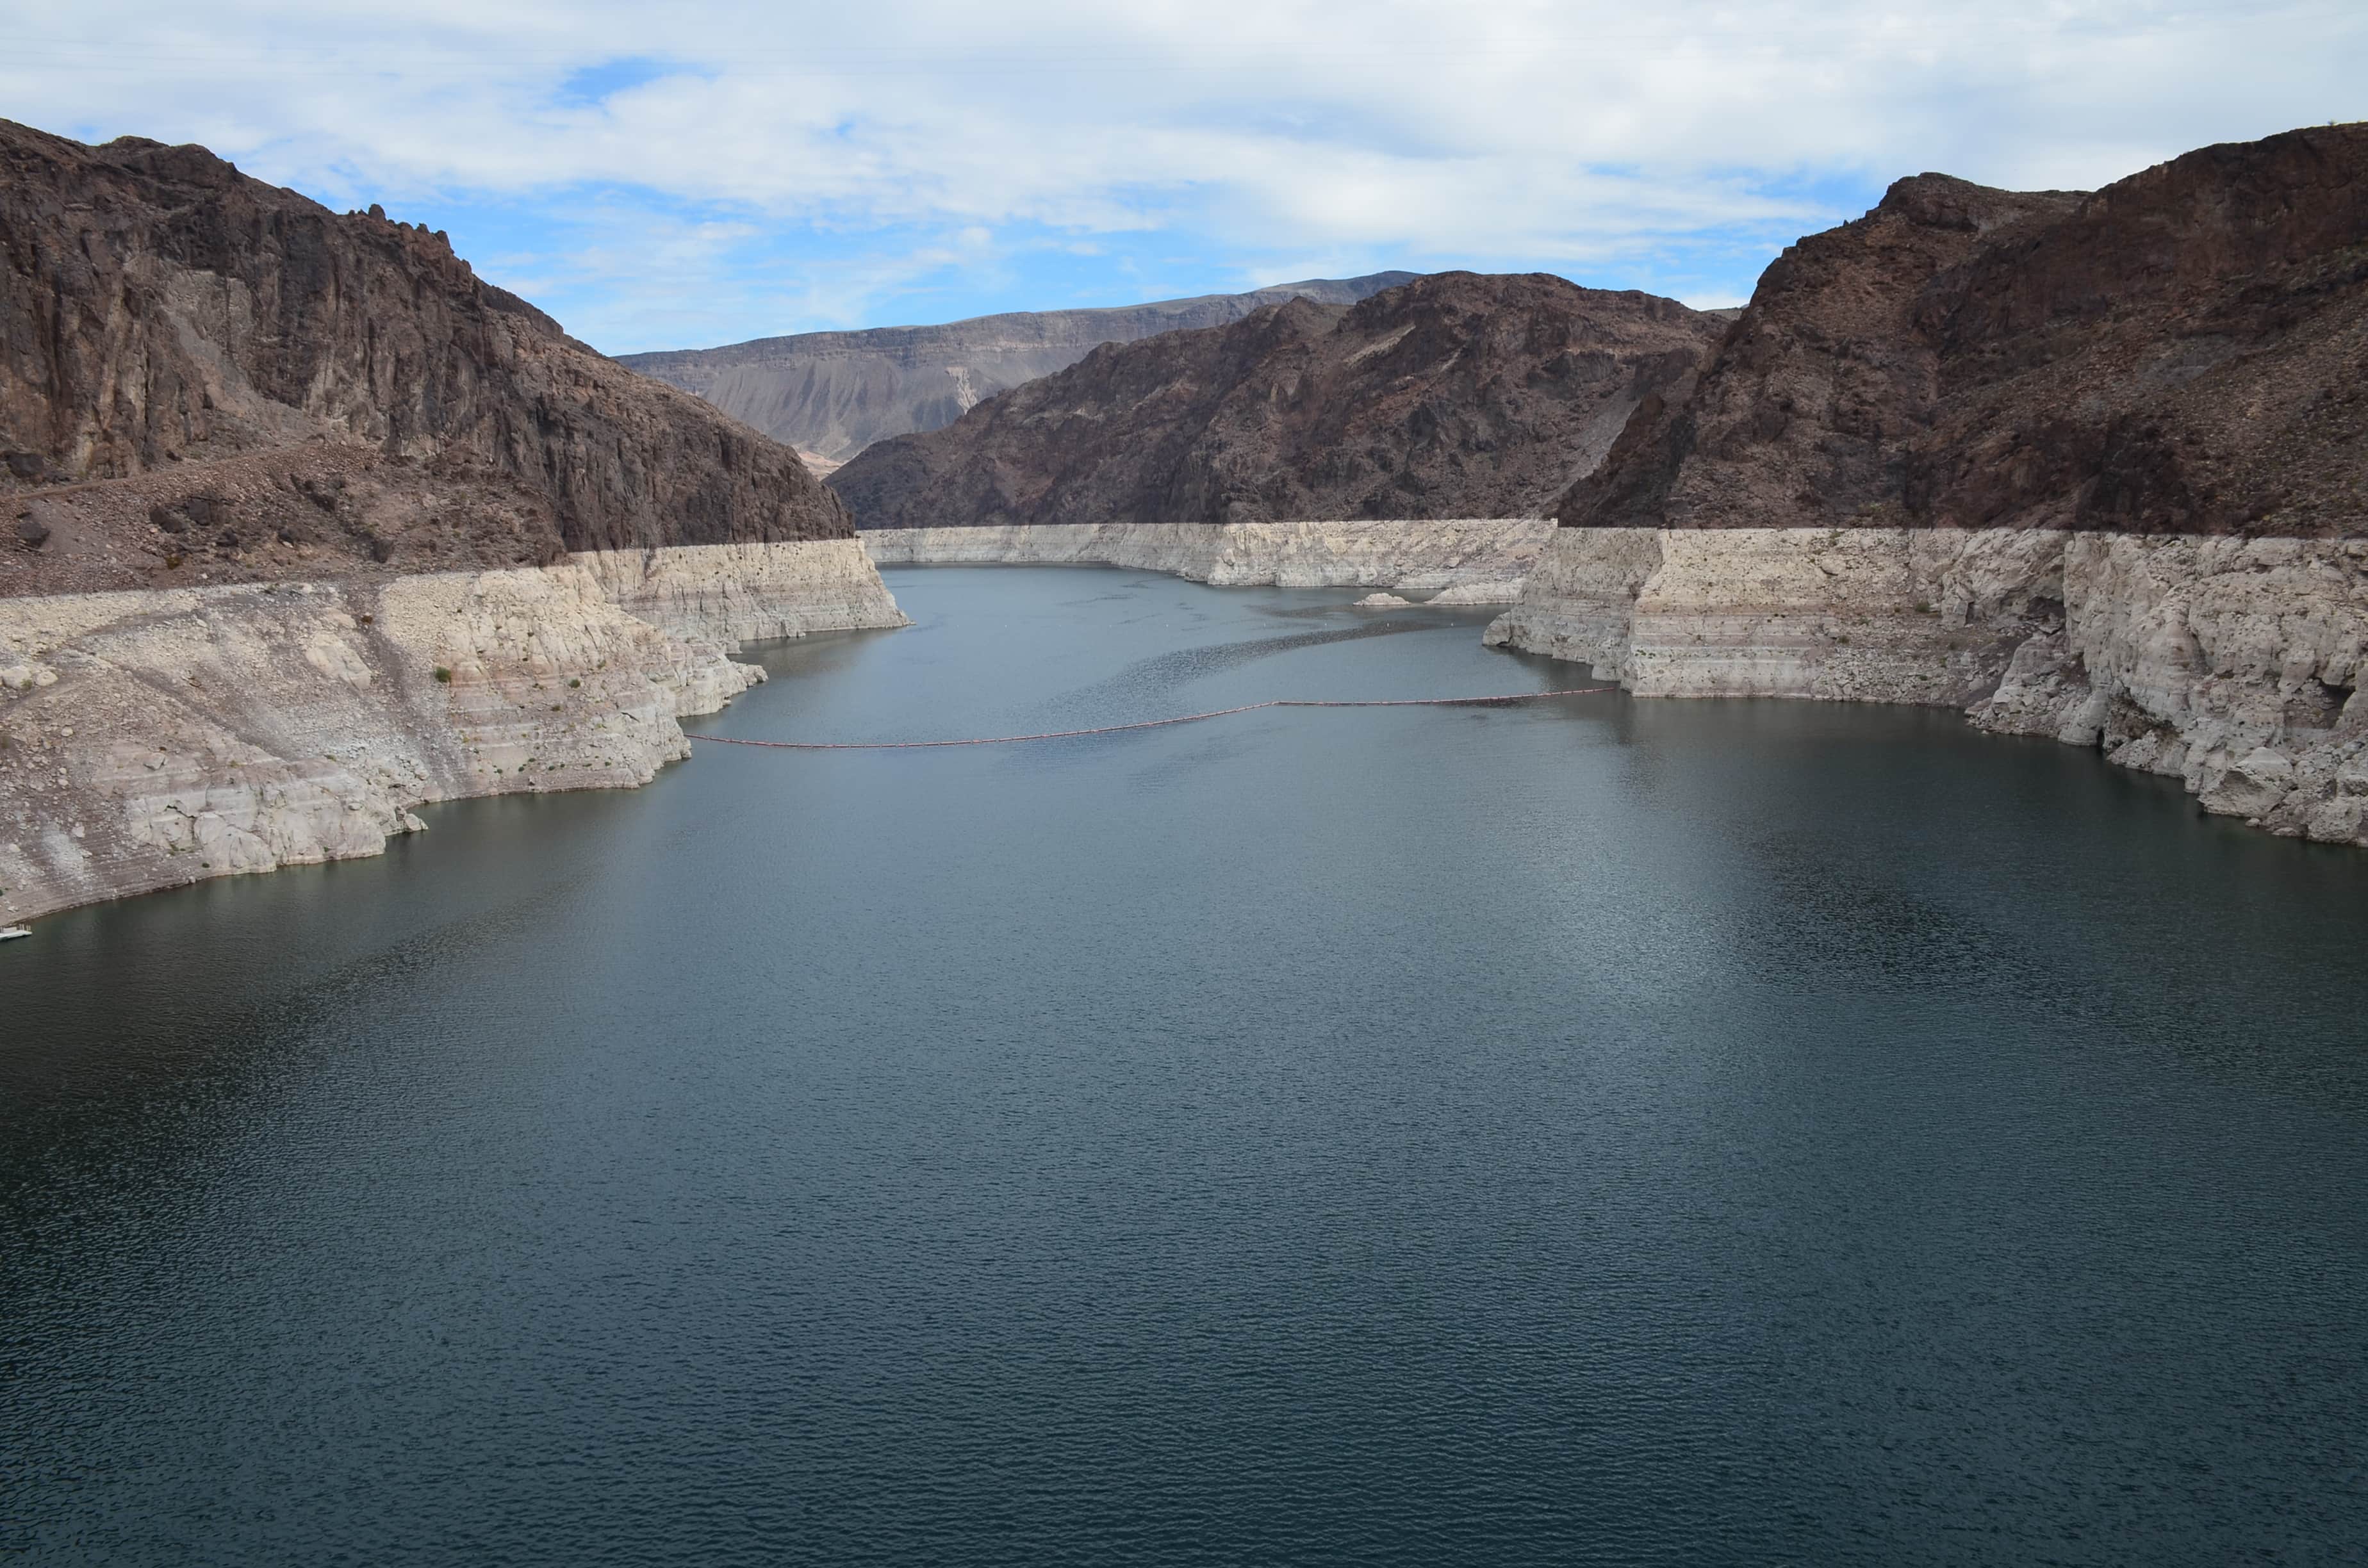 Lake Mead and the Colorado River at Hoover Dam in Nevada